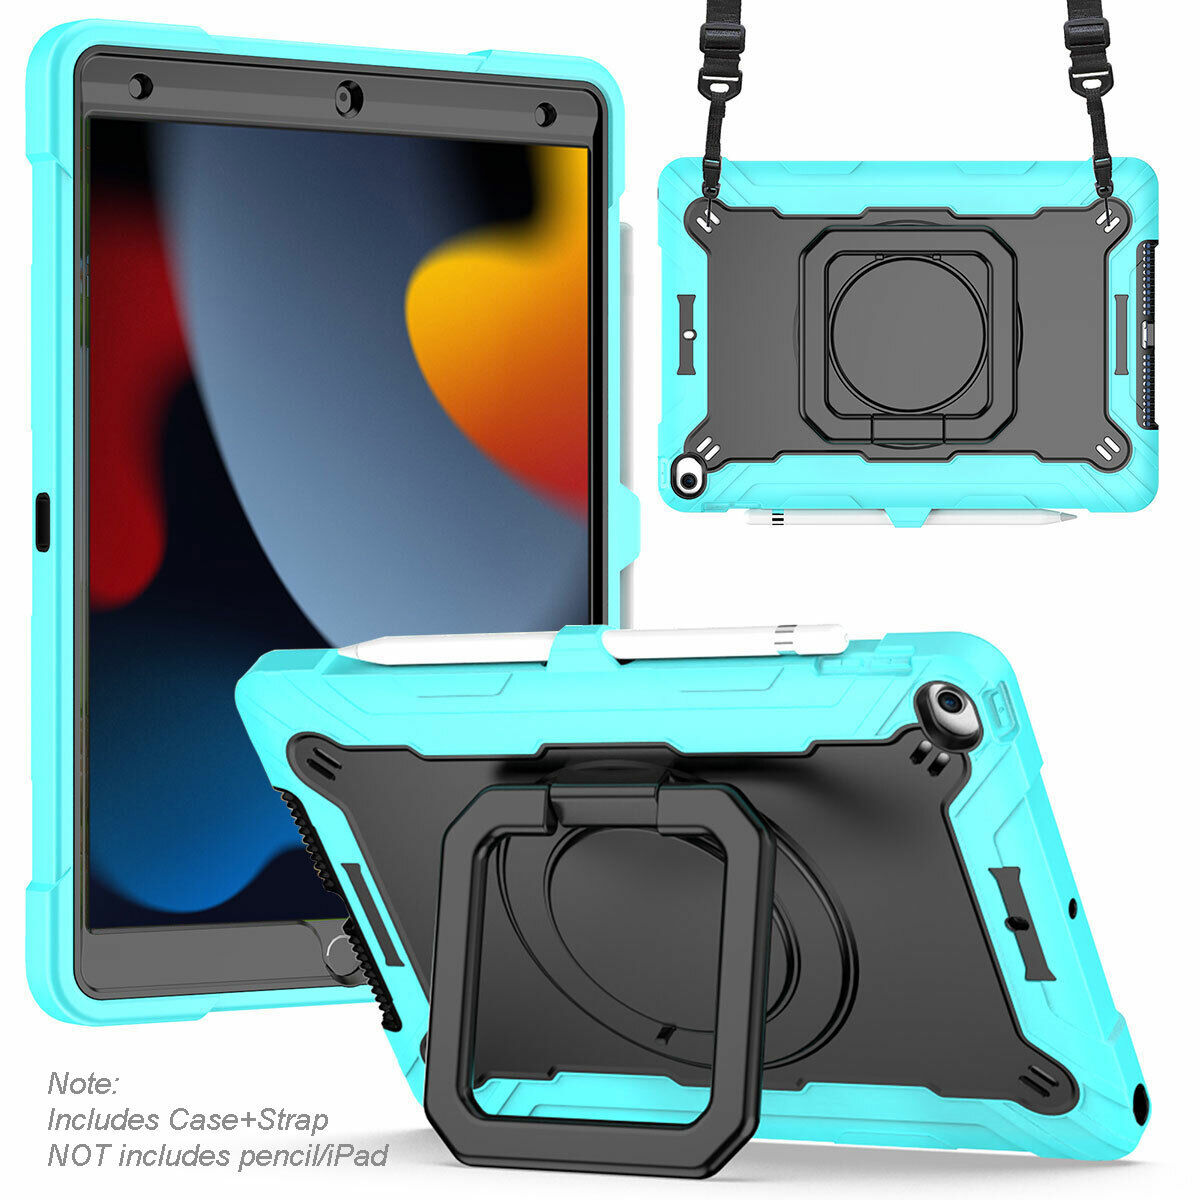 Shockproof Rotating Hybrid Stand Handle Case Cover Strap For Apple iPad 7 8 9 10